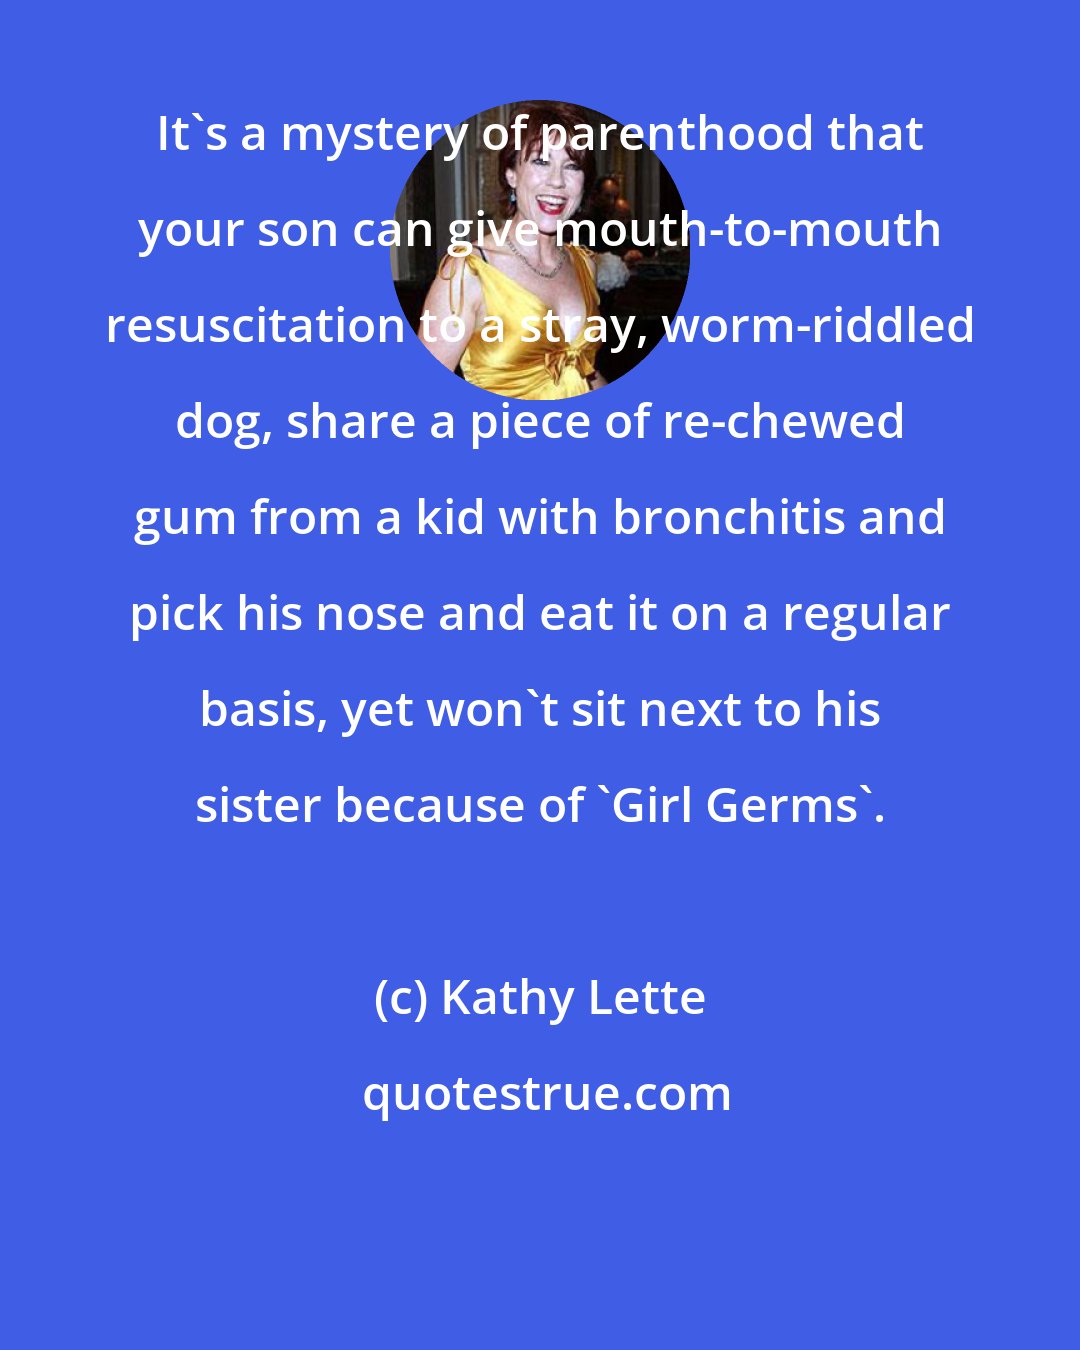 Kathy Lette: It's a mystery of parenthood that your son can give mouth-to-mouth resuscitation to a stray, worm-riddled dog, share a piece of re-chewed gum from a kid with bronchitis and pick his nose and eat it on a regular basis, yet won't sit next to his sister because of 'Girl Germs'.